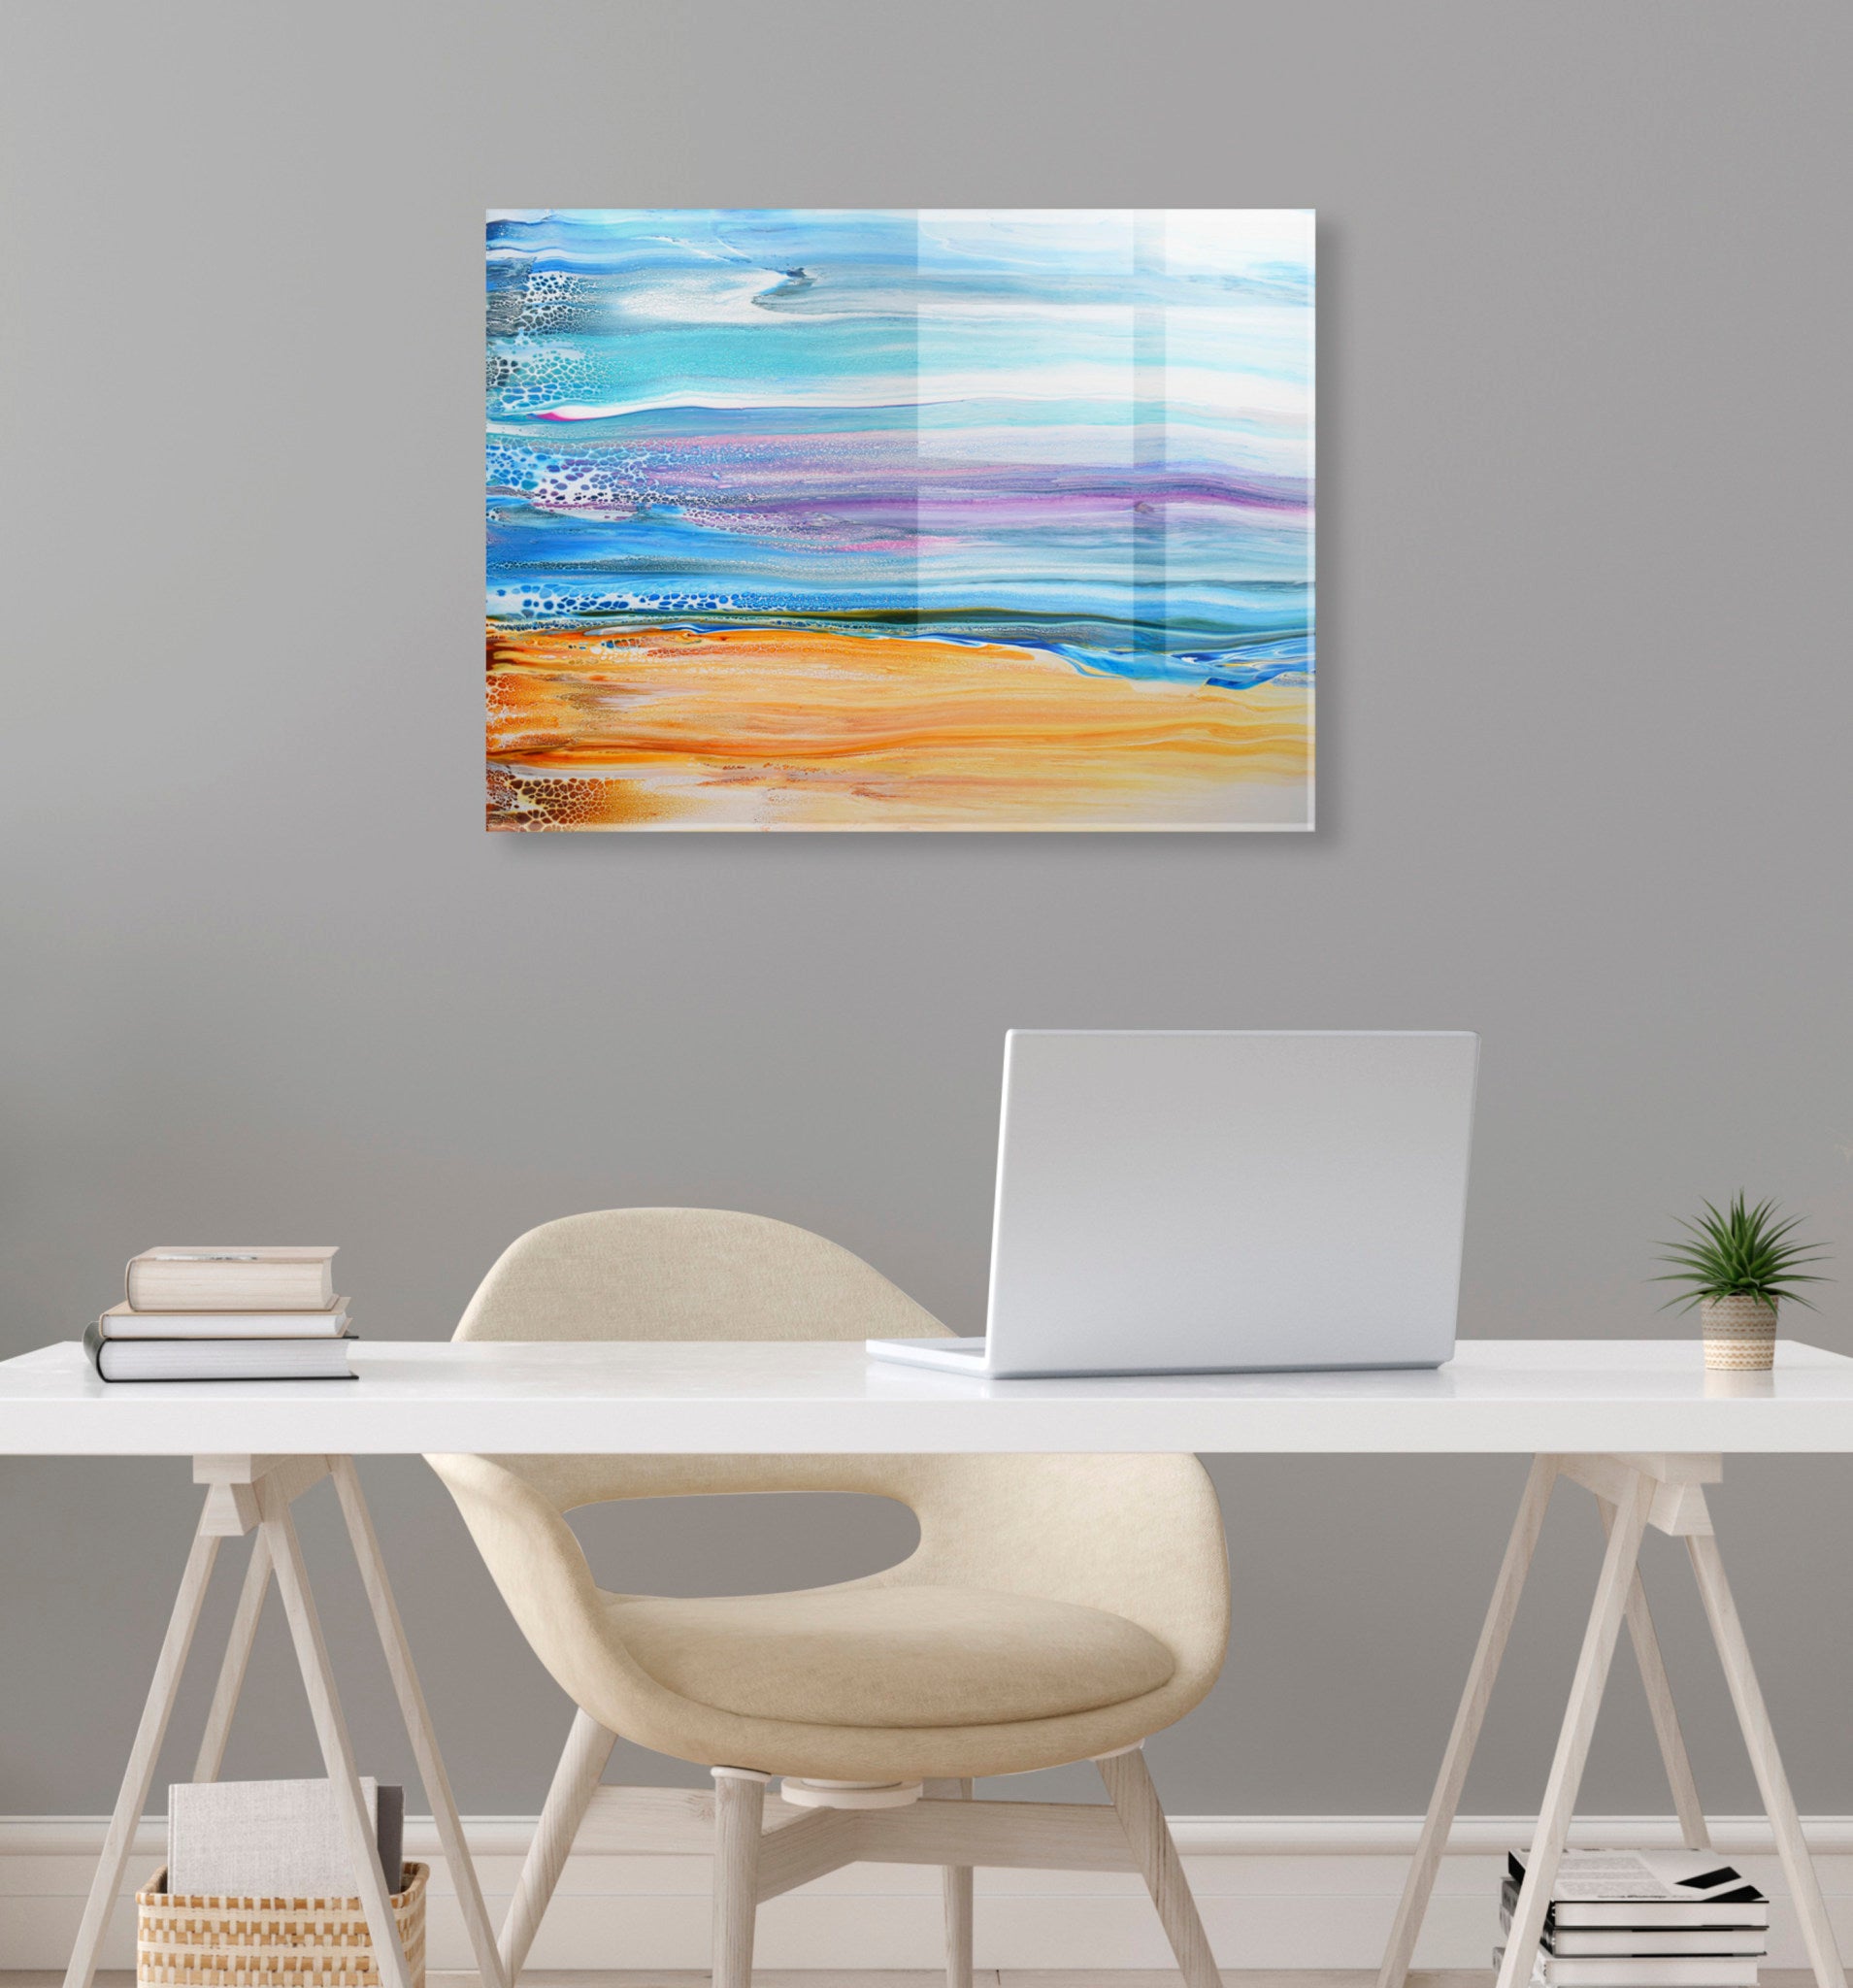 Sand and Surf Floating Acrylic Art by Xizhou Xie